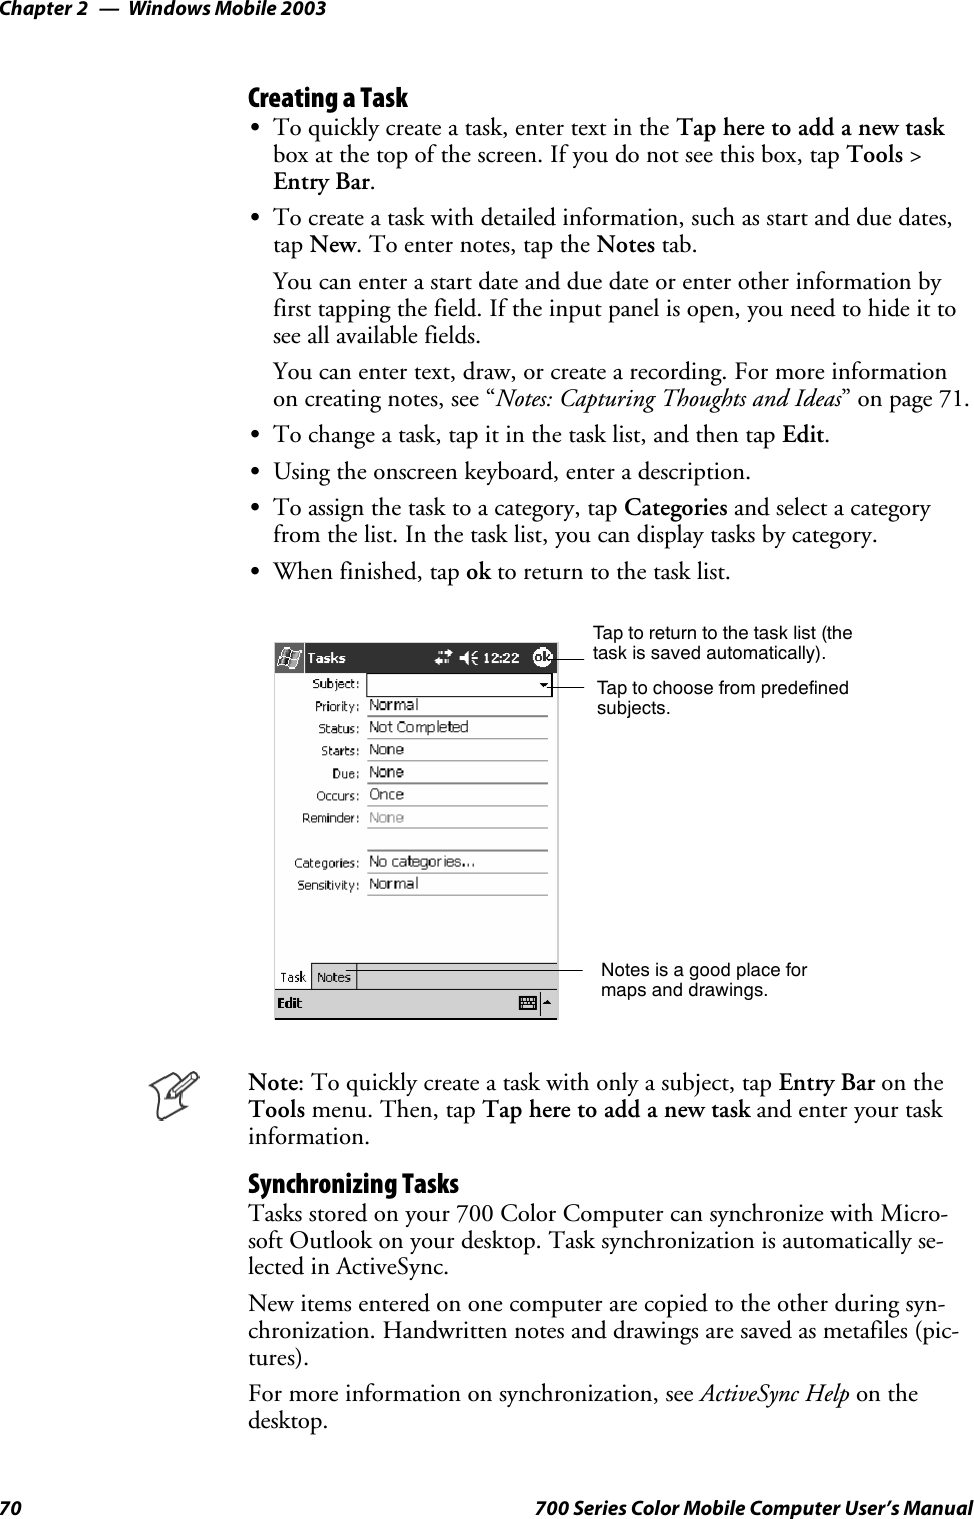 Windows Mobile 2003Chapter —270 700 Series Color Mobile Computer User’s ManualCreating a TaskSTo quickly create a task, enter text in the Tap here to add a new taskboxatthetopofthescreen.Ifyoudonotseethisbox,tapTools &gt;Entry Bar.STo create a task with detailed information, such as start and due dates,tap New. To enter notes, tap the Notes tab.You can enter a start date and due date or enter other information byfirst tapping the field. If the input panel is open, you need to hide it tosee all available fields.Youcanentertext,draw,orcreatearecording.Formoreinformationon creating notes, see “Notes: Capturing Thoughts and Ideas” on page 71.STo change a task, tap it in the task list, and then tap Edit.SUsing the onscreen keyboard, enter a description.STo assign the task to a category, tap Categories and select a categoryfrom the list. In the task list, you can display tasks by category.SWhen finished, tap ok to return to the task list.Taptoreturntothetasklist(thetask is saved automatically).Tap to choose from predefinedsubjects.Notes is a good place formaps and drawings.Note: To quickly create a task with only a subject, tap Entry Bar on theTools menu. Then, tap Tap here to add a new task and enter your taskinformation.Synchronizing TasksTasks stored on your 700 Color Computer can synchronize with Micro-soft Outlook on your desktop. Task synchronization is automatically se-lected in ActiveSync.New items entered on one computer are copied to the other during syn-chronization. Handwritten notes and drawings are saved as metafiles (pic-tures).For more information on synchronization, see ActiveSync Help on thedesktop.